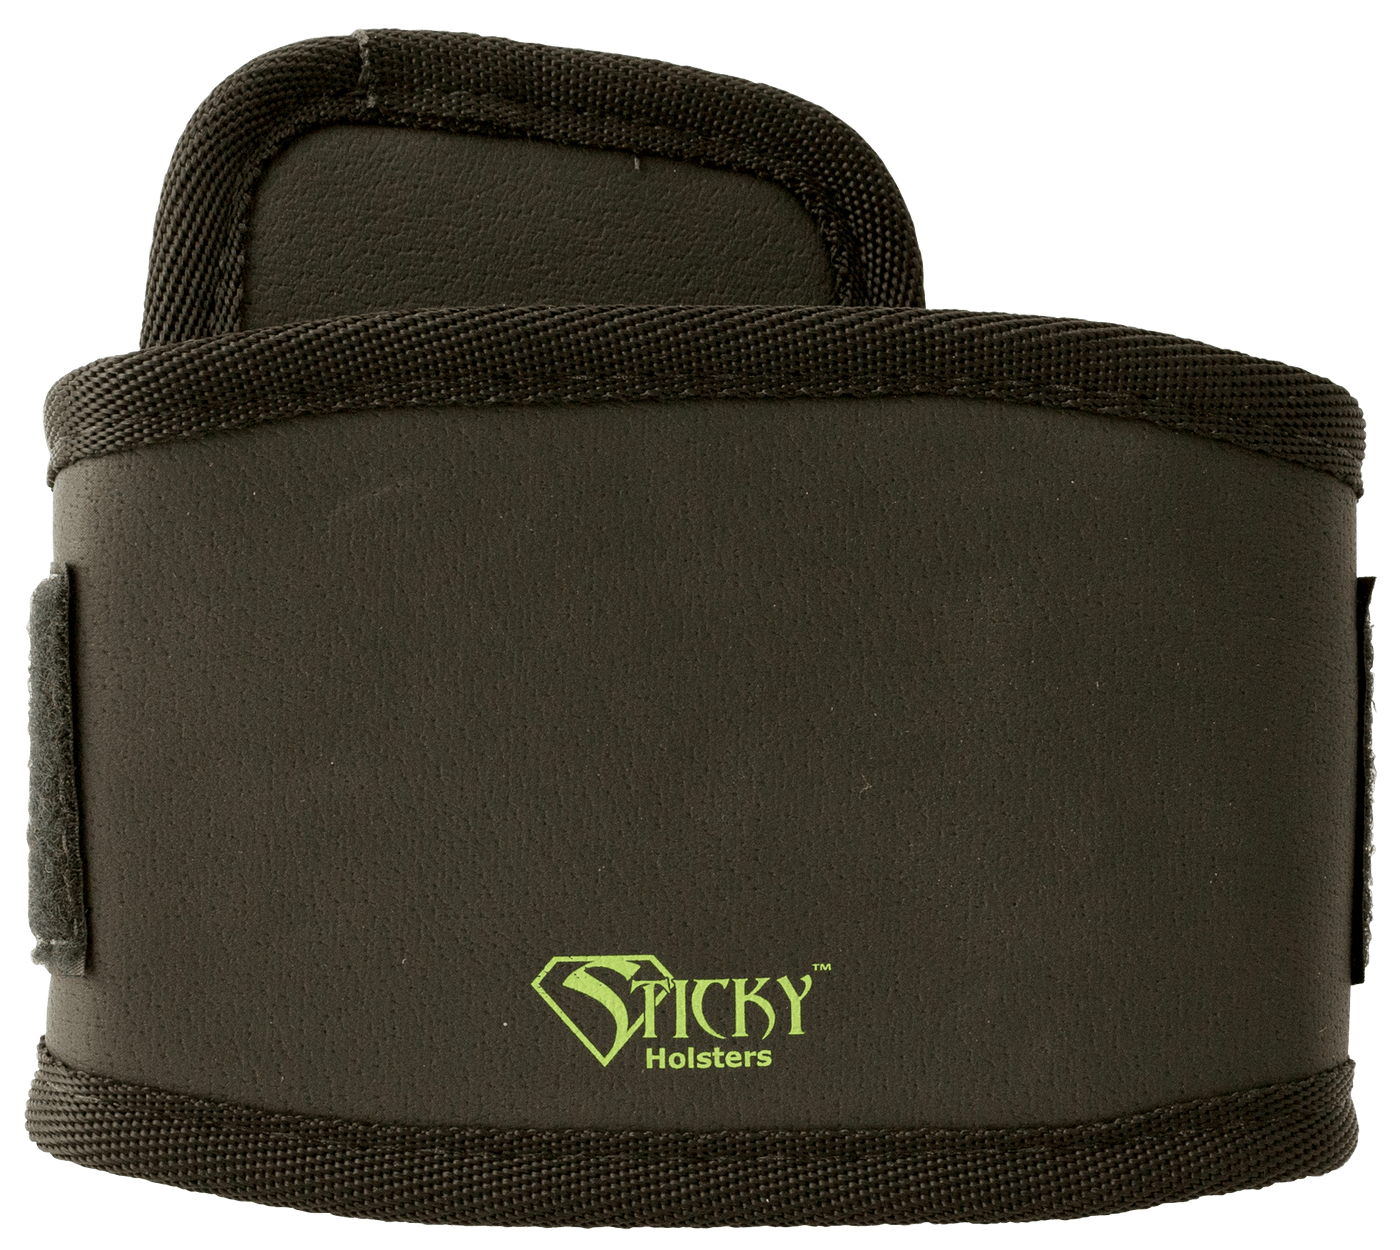 Sticky Holsters Sticky Holsters Anklebiter Firearm Accessories